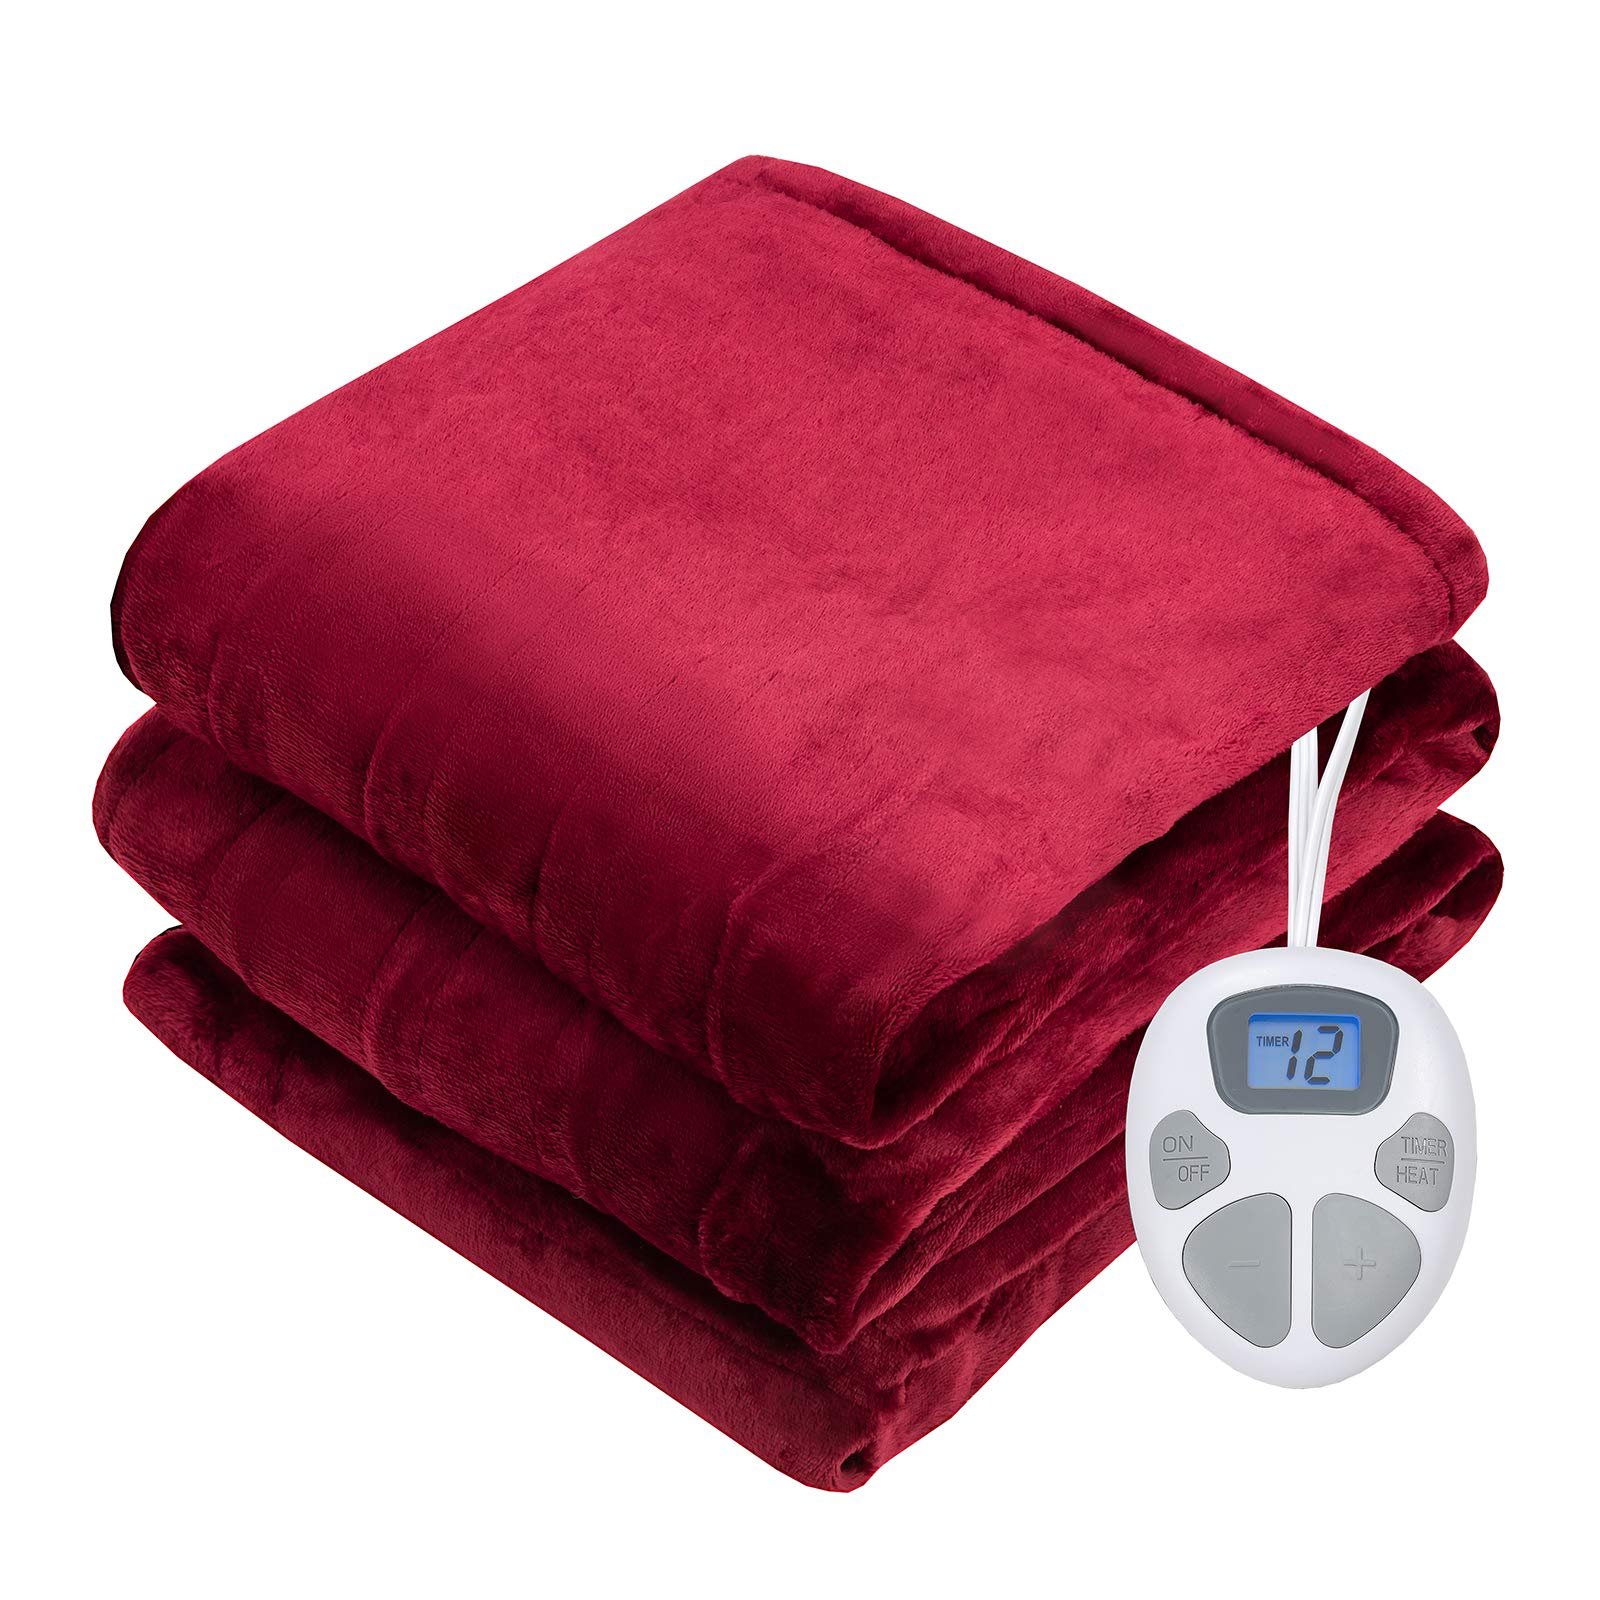 Giantex Electric Heated Blanket, Flannel Electric Blanket Throws, 10 Heating Levels, 8 Hours Auto Off